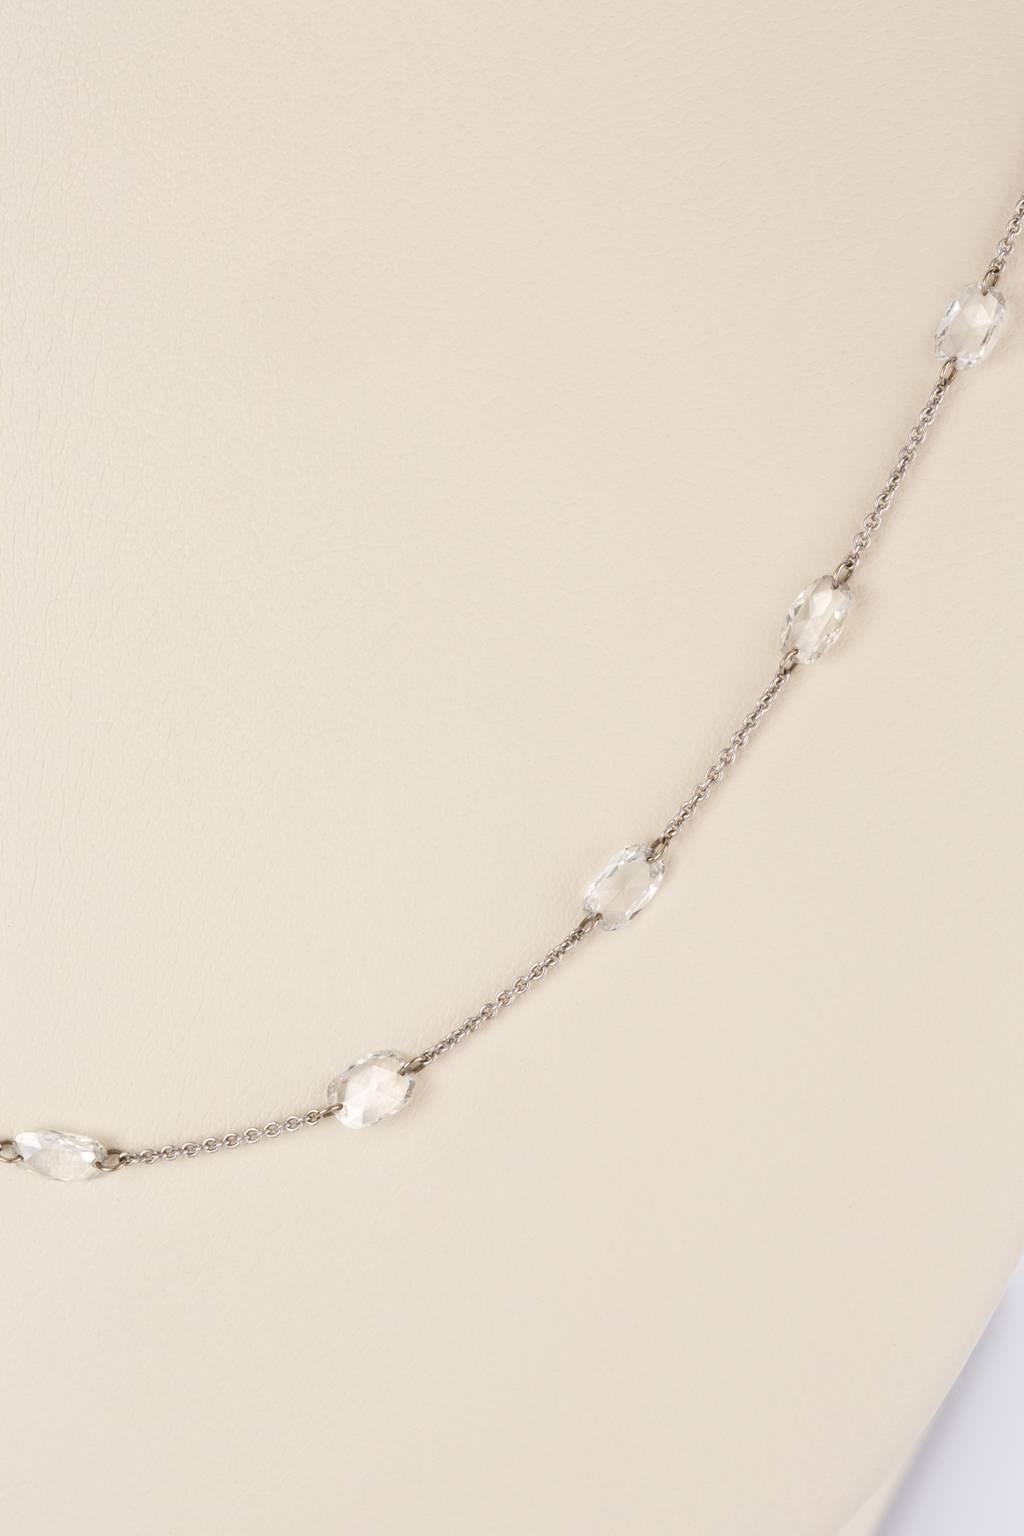 This necklace is so pretty and delicate, it's incredibly hard to photograph how gorgeous it is. Oval faceted white diamonds weighing 3.74cts are drilled at each end to join a fine 18k white gold link chain. It's understated, elegant and so wearable,